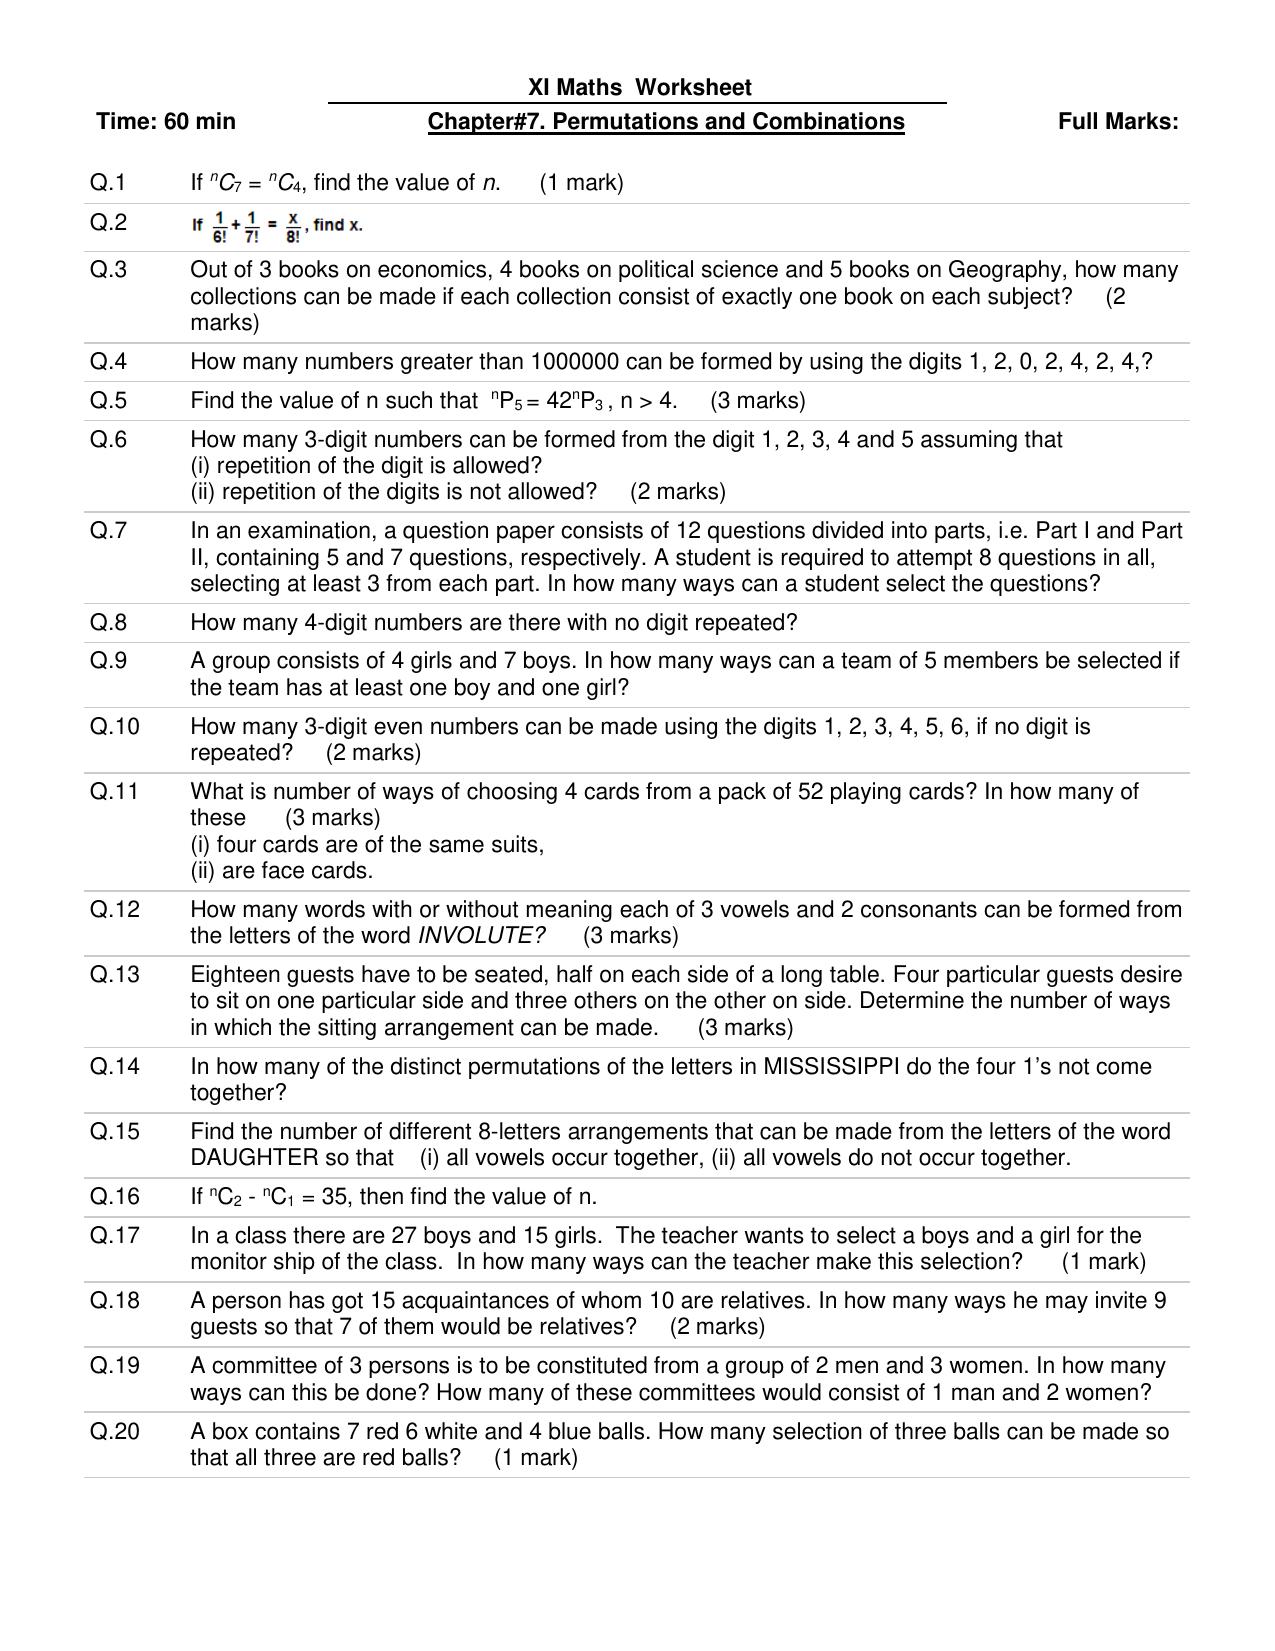 CBSE Worksheets for Class 11 Mathematics Permutations and Combinations Assignment 1 - Page 1